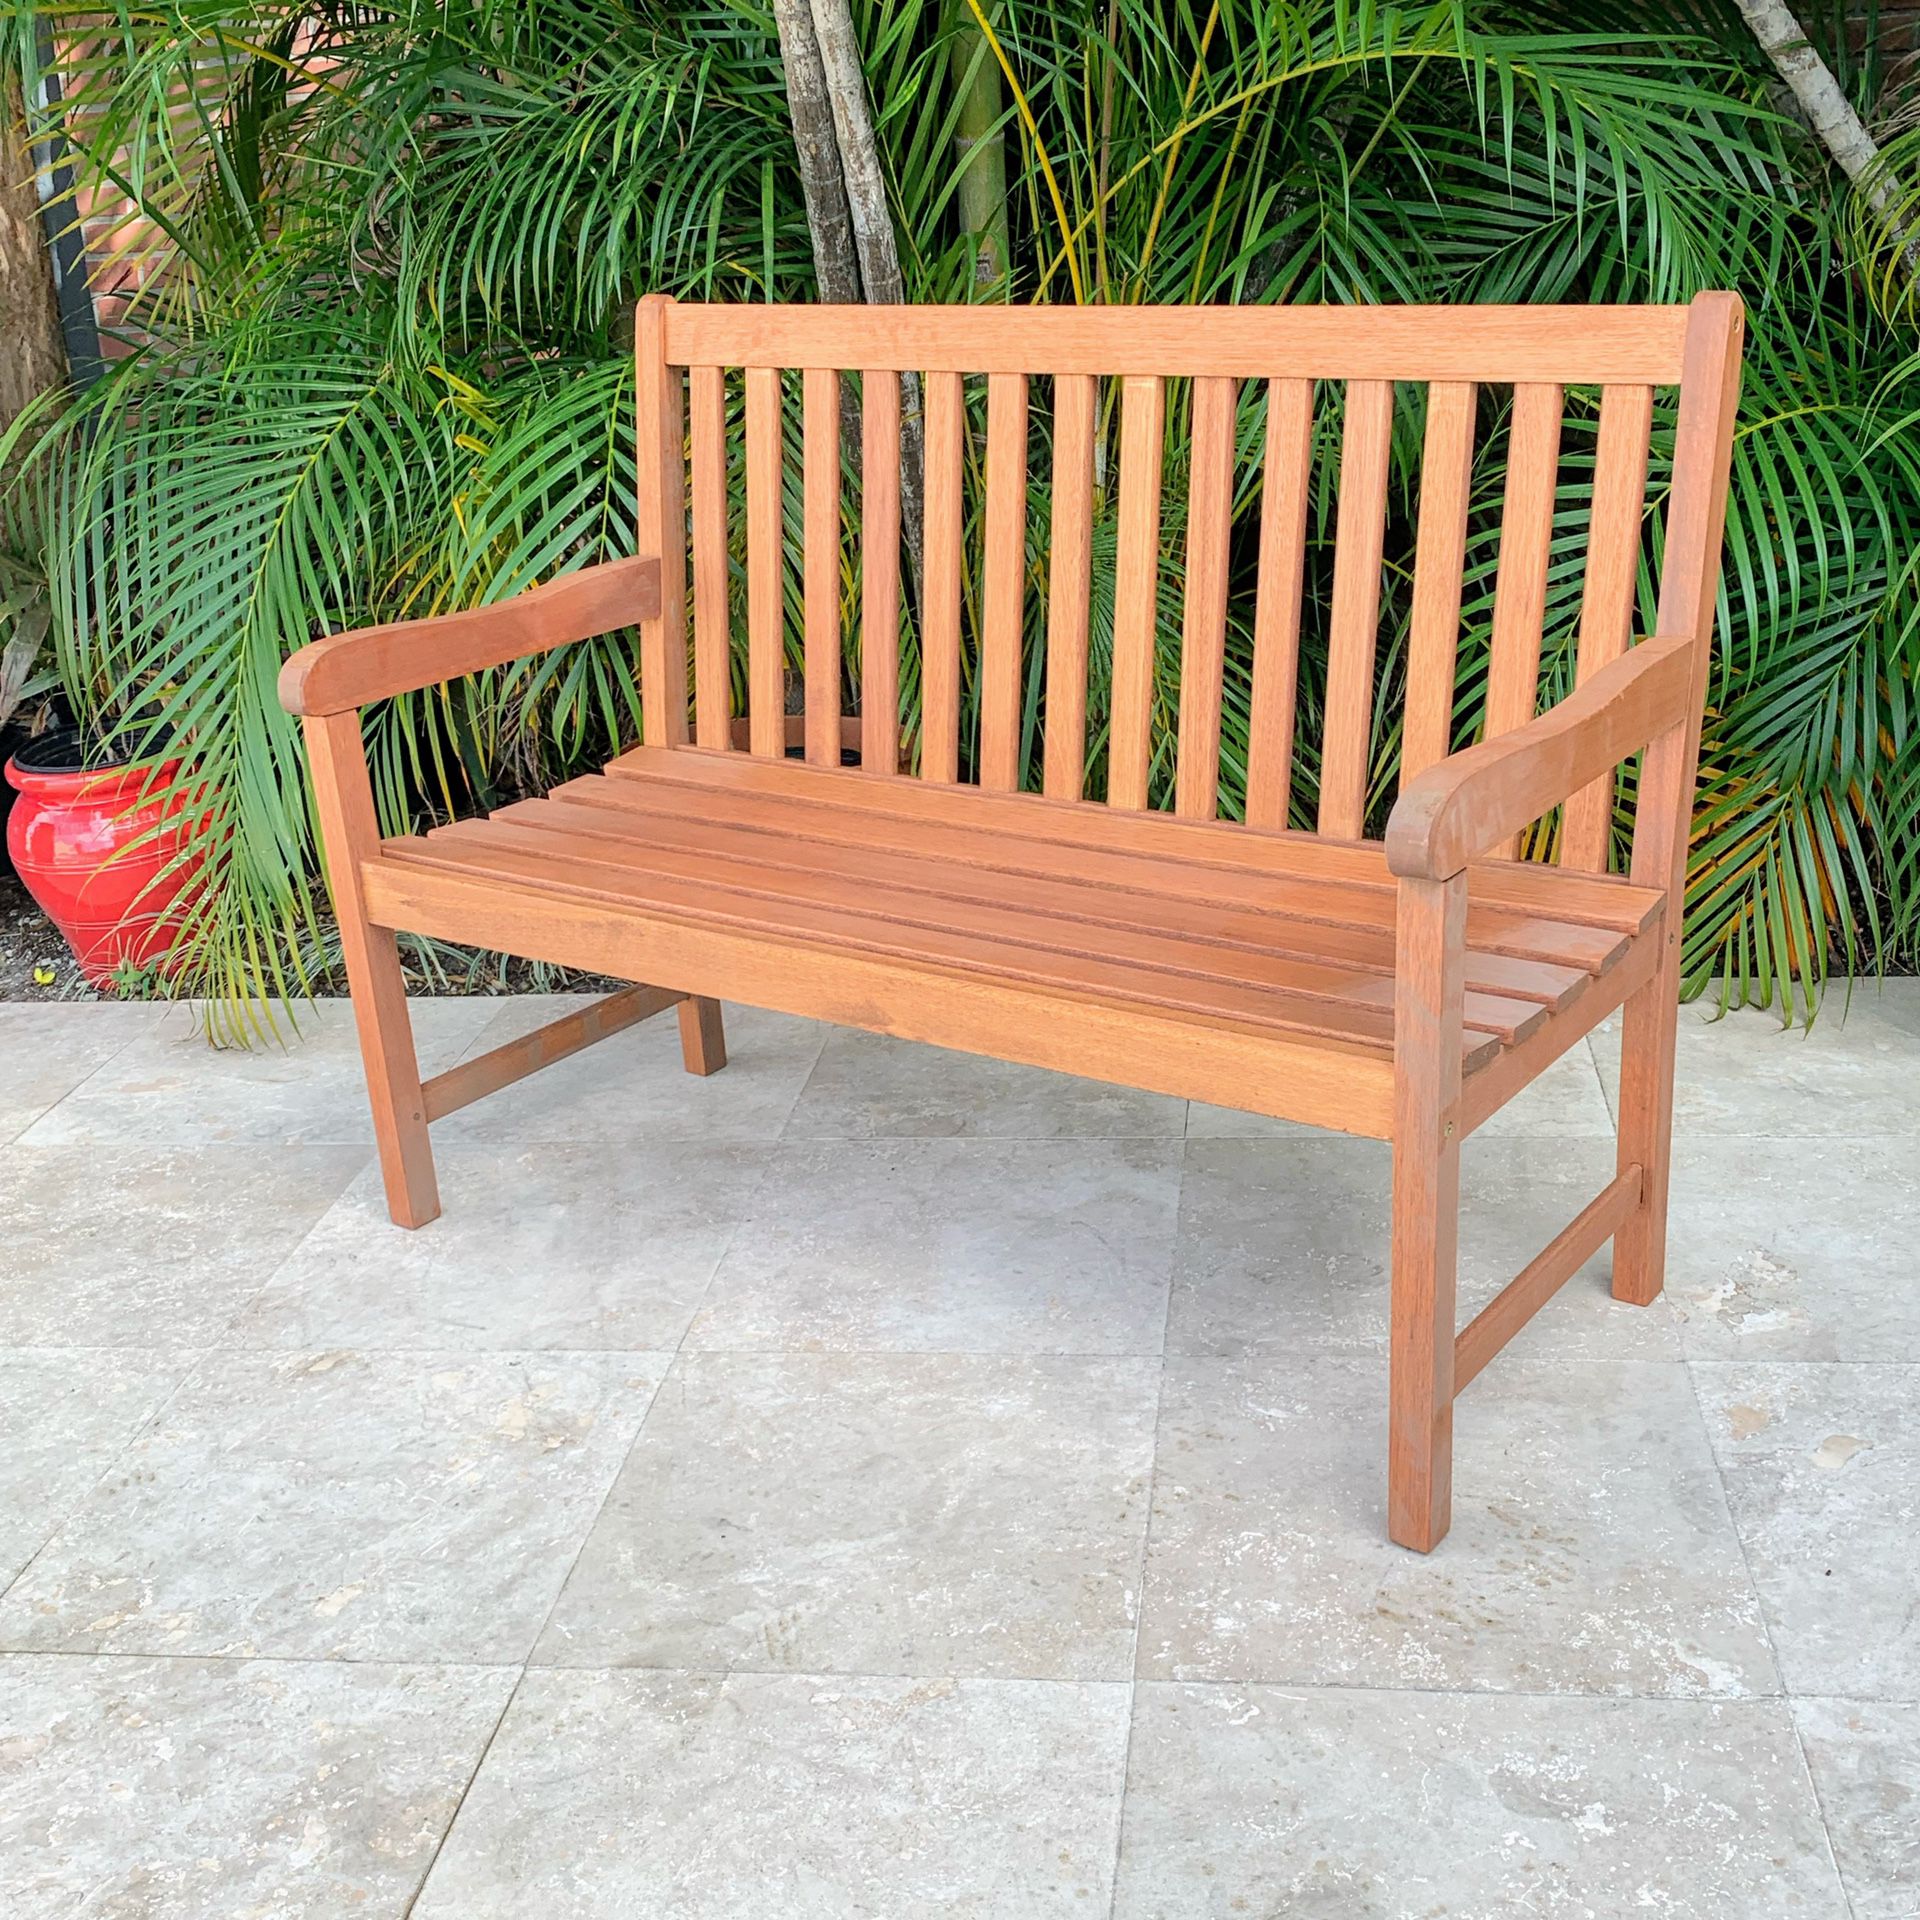 Patio Furniture Bench Commercial grade 4 ft